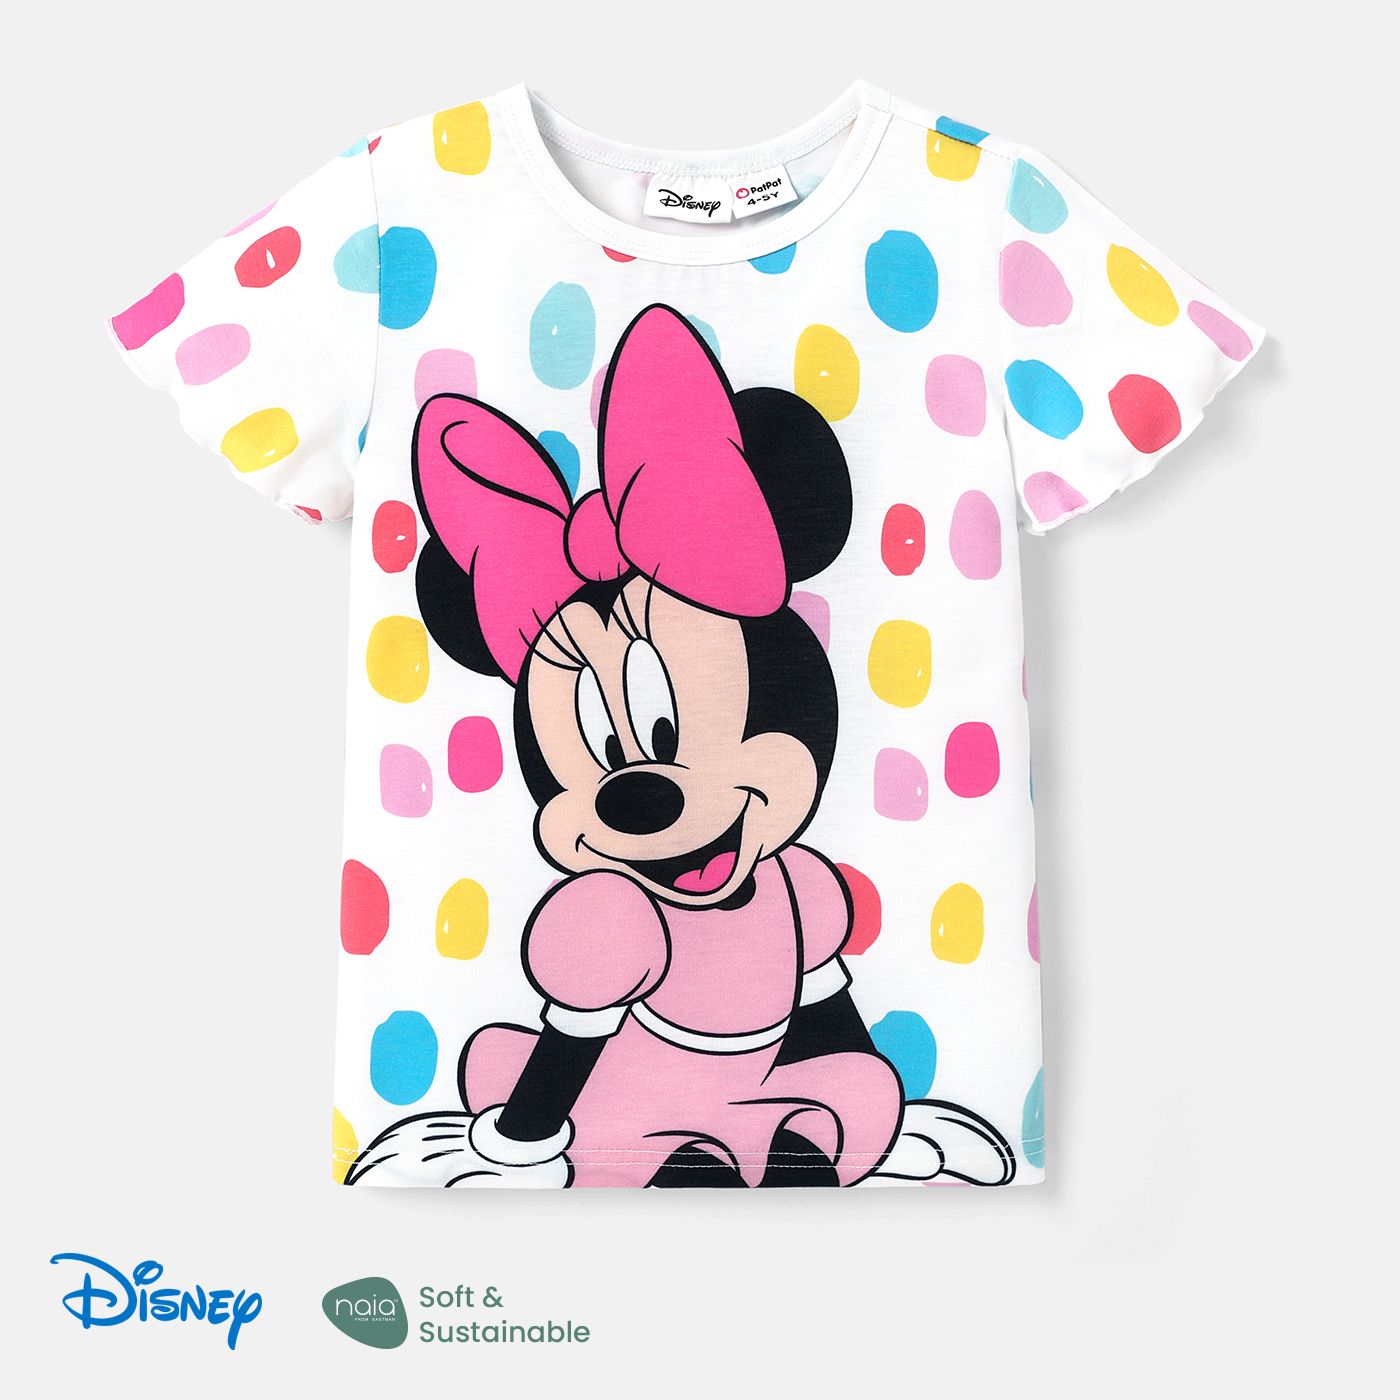 Disney Mickey And Friends 1pc Toddler/Kid Girl/Boy Character Tyedyed/Stripe/Colorful Print Naiaâ¢ Short-sleeve Tee